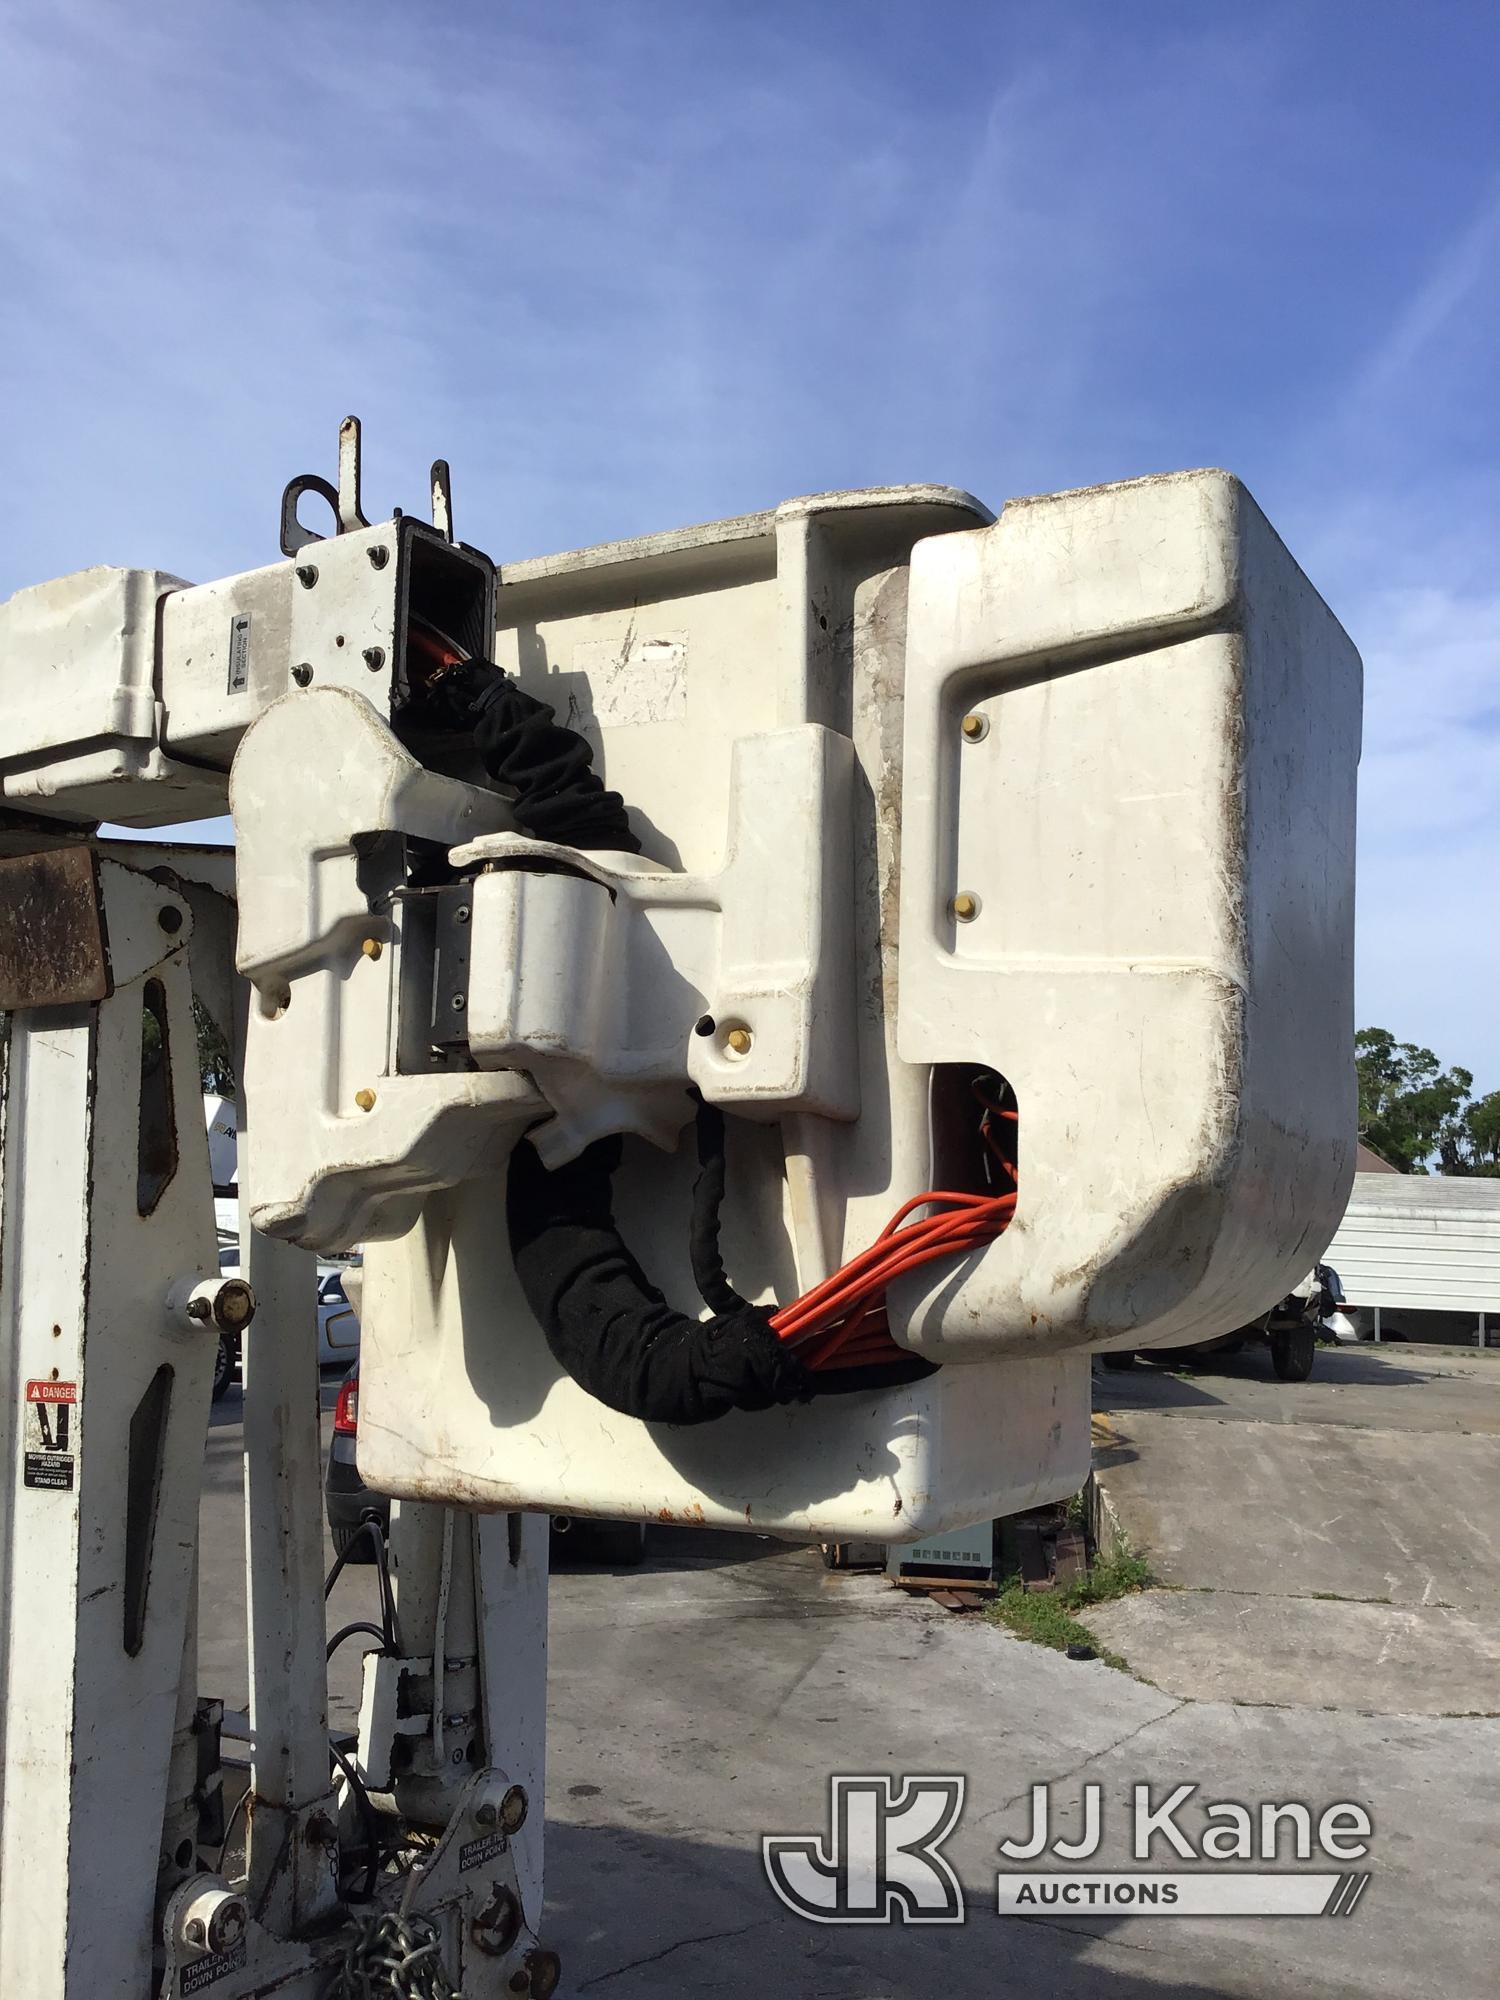 (Ocala, FL) Altec AT37GW Runs, Has Remote & Keys) (Does not Move or Operate, Condition Unknown